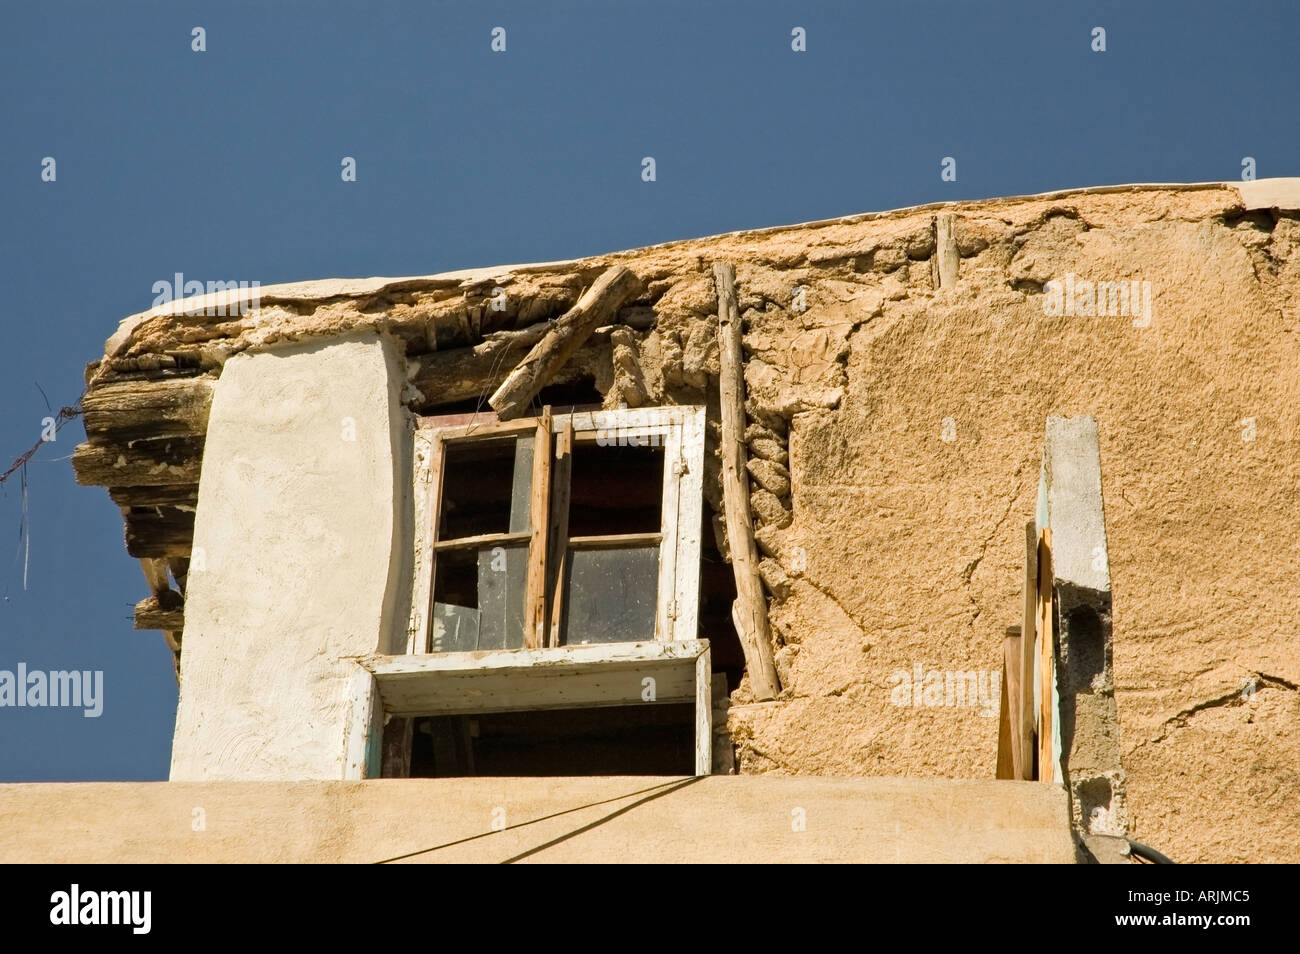 Typical run down  housing in Damascus, Syria, Middle East. DSC 5578 Stock Photo